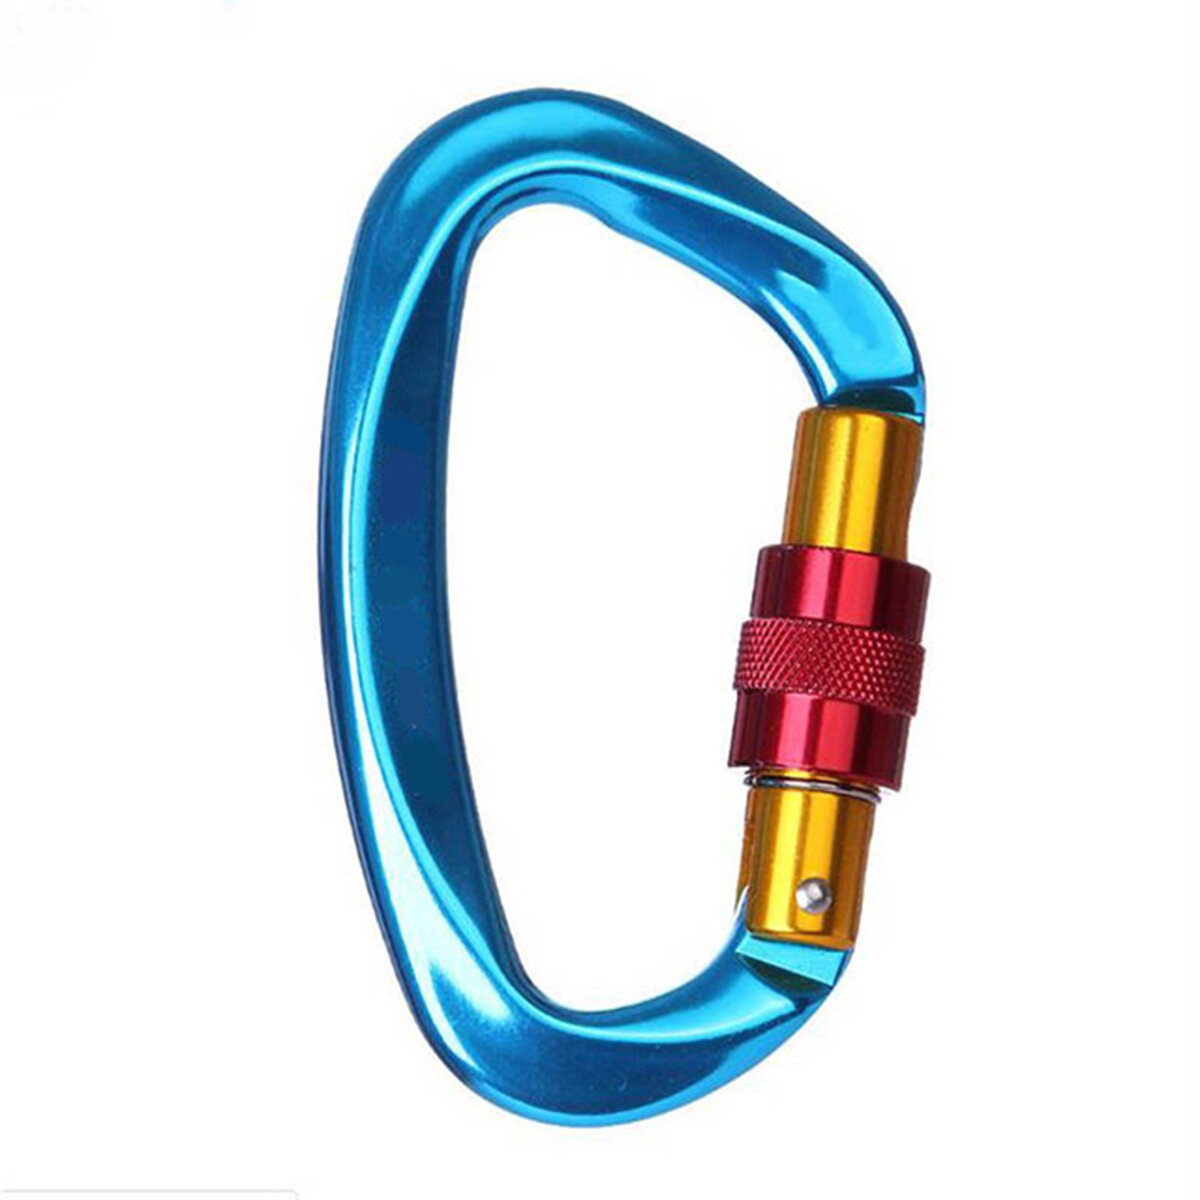 25KN Locking Climbing Carabiner D Shaped Screwgate Carabiner Clips Perfect For Outdoor Sport Hiking Travel Mountaineer Hammock